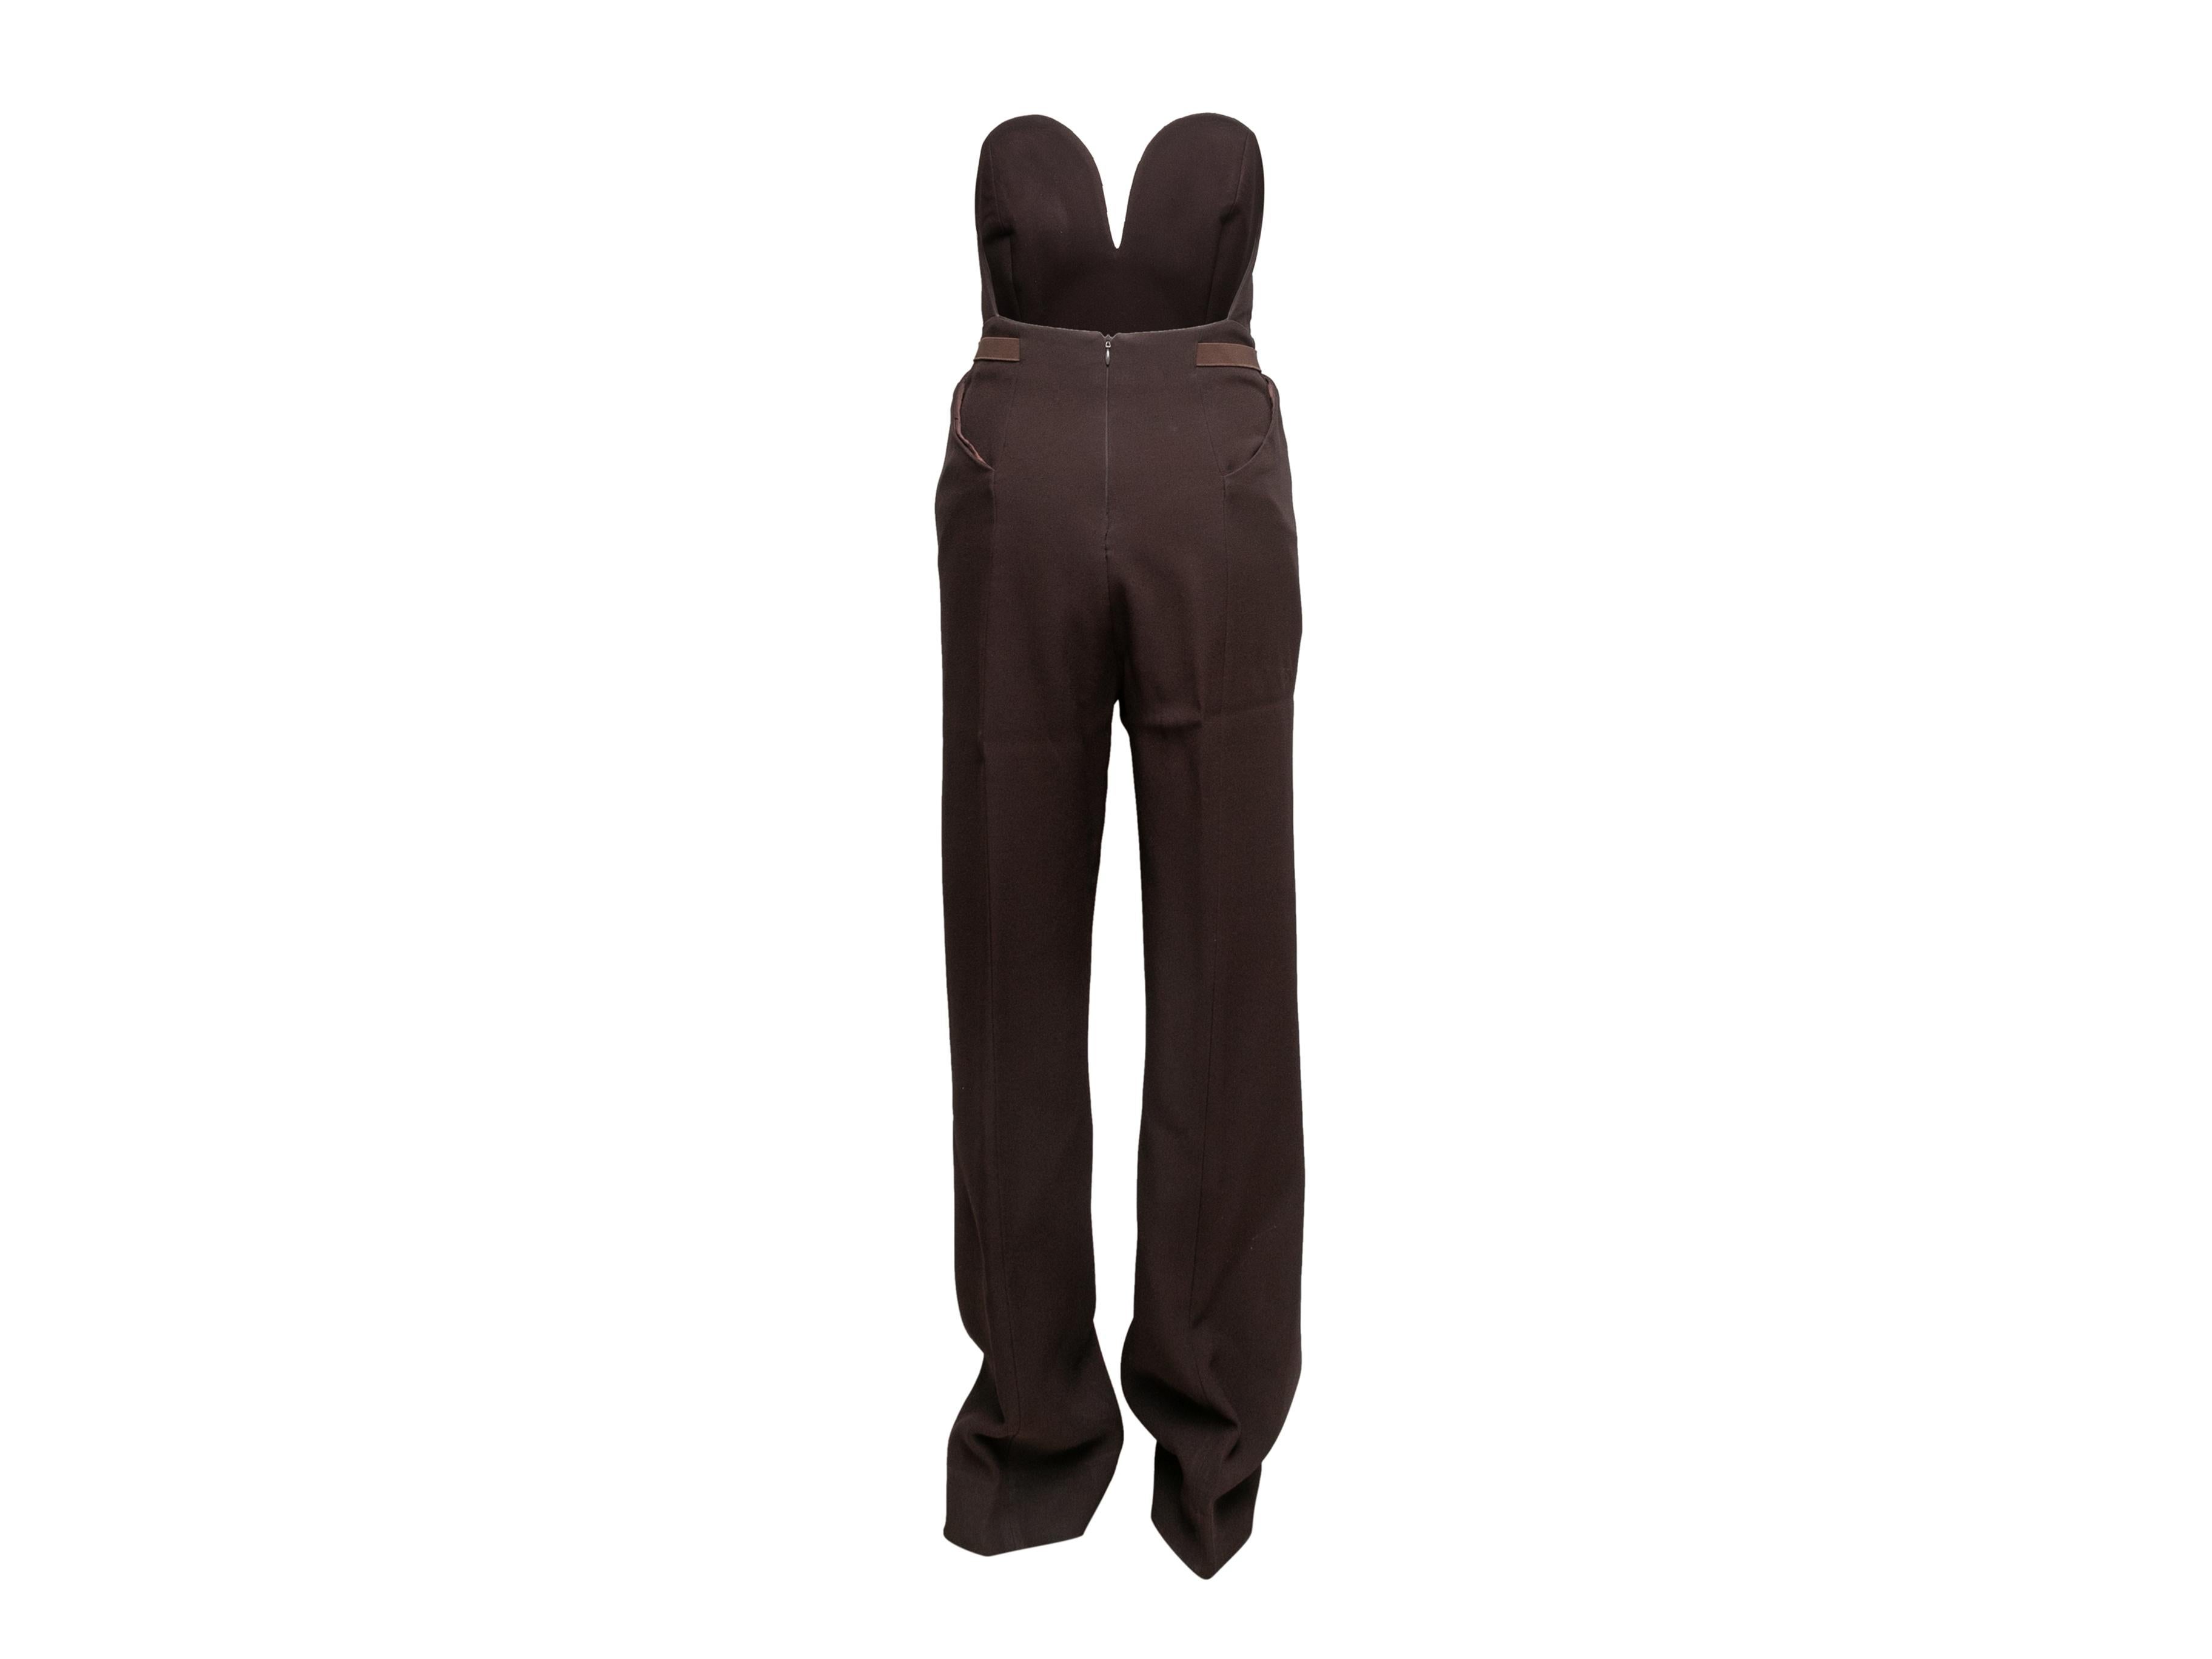 Brown Maison Margiela Strapless Jumpsuit Size EU 42 In Good Condition For Sale In New York, NY